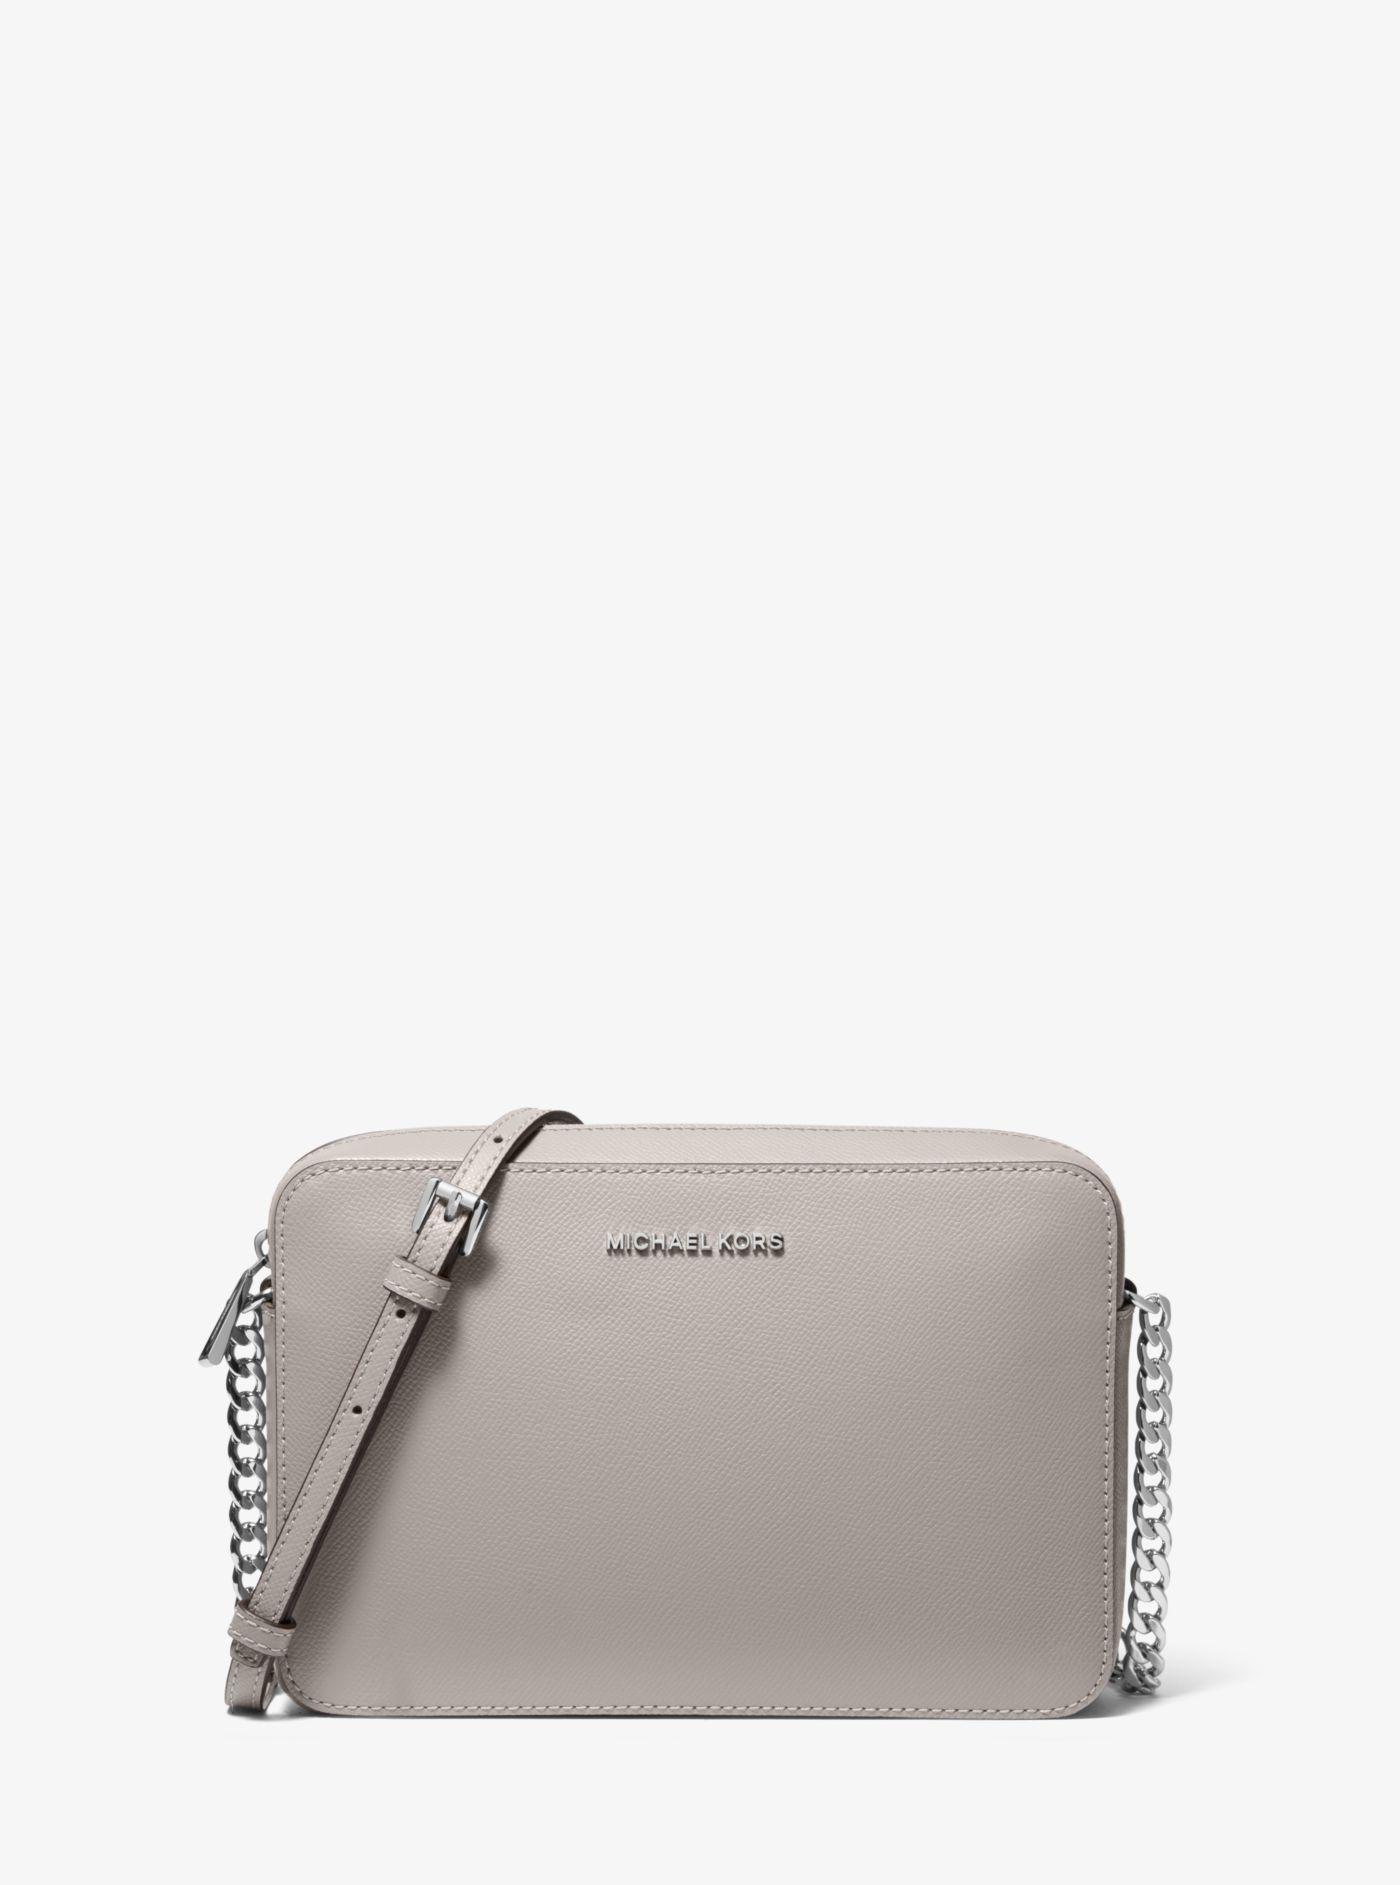 Michael Kors Jet Set Large Saffiano Leather Crossbody Bag in Pearl Grey  (Gray) | Lyst